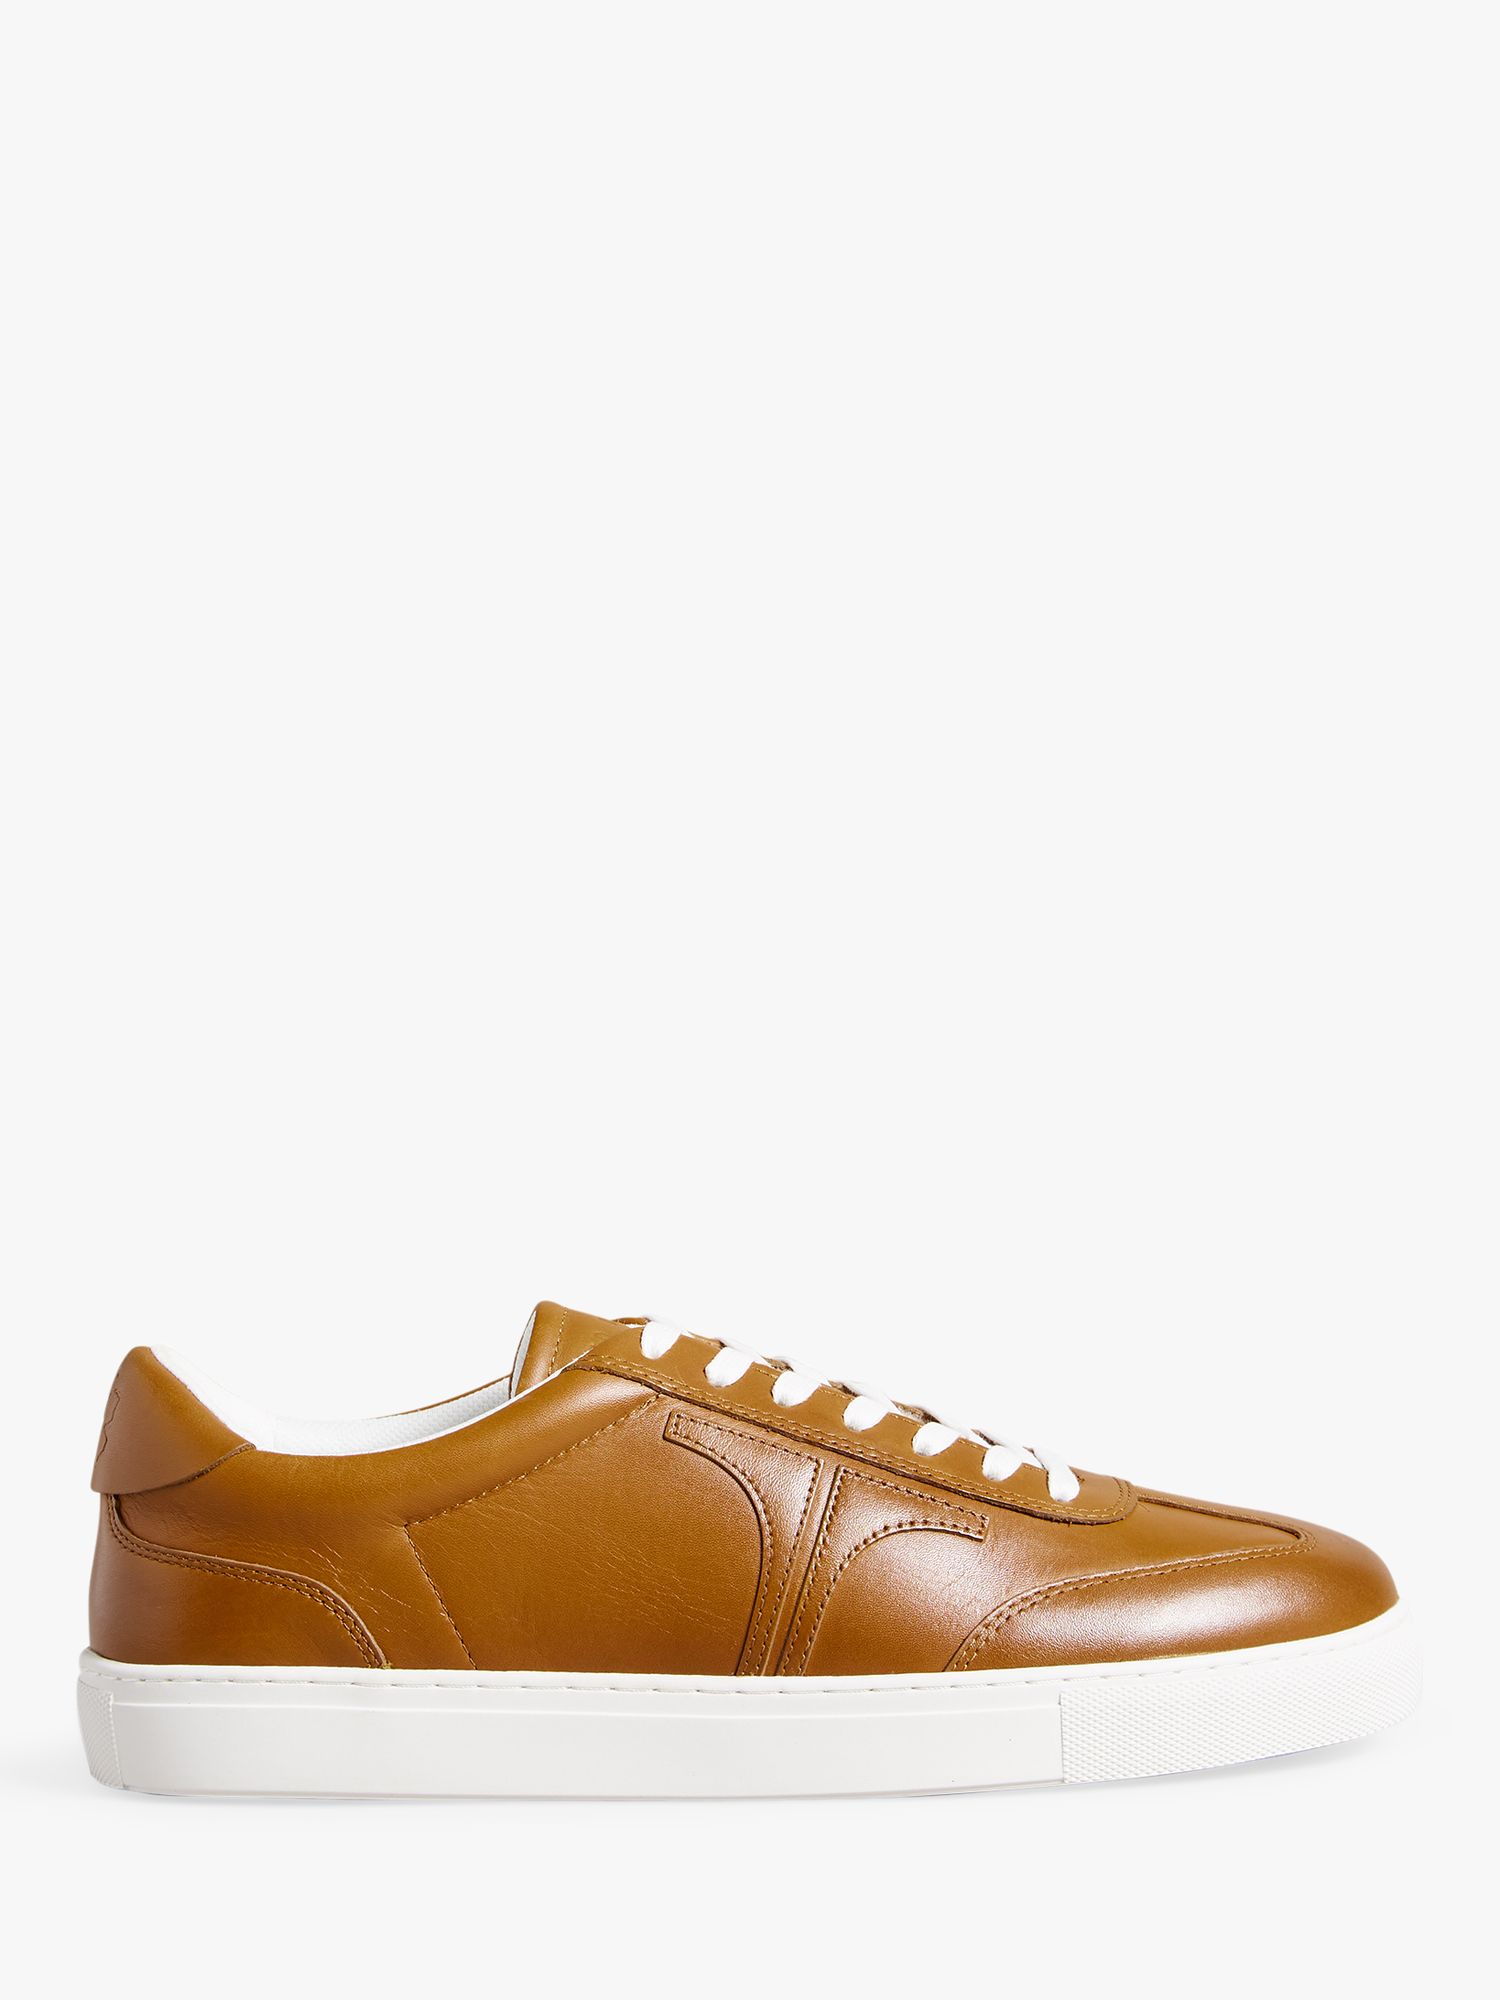 Ted Baker Robertt Leather Retro Trainers, Tan at John Lewis & Partners